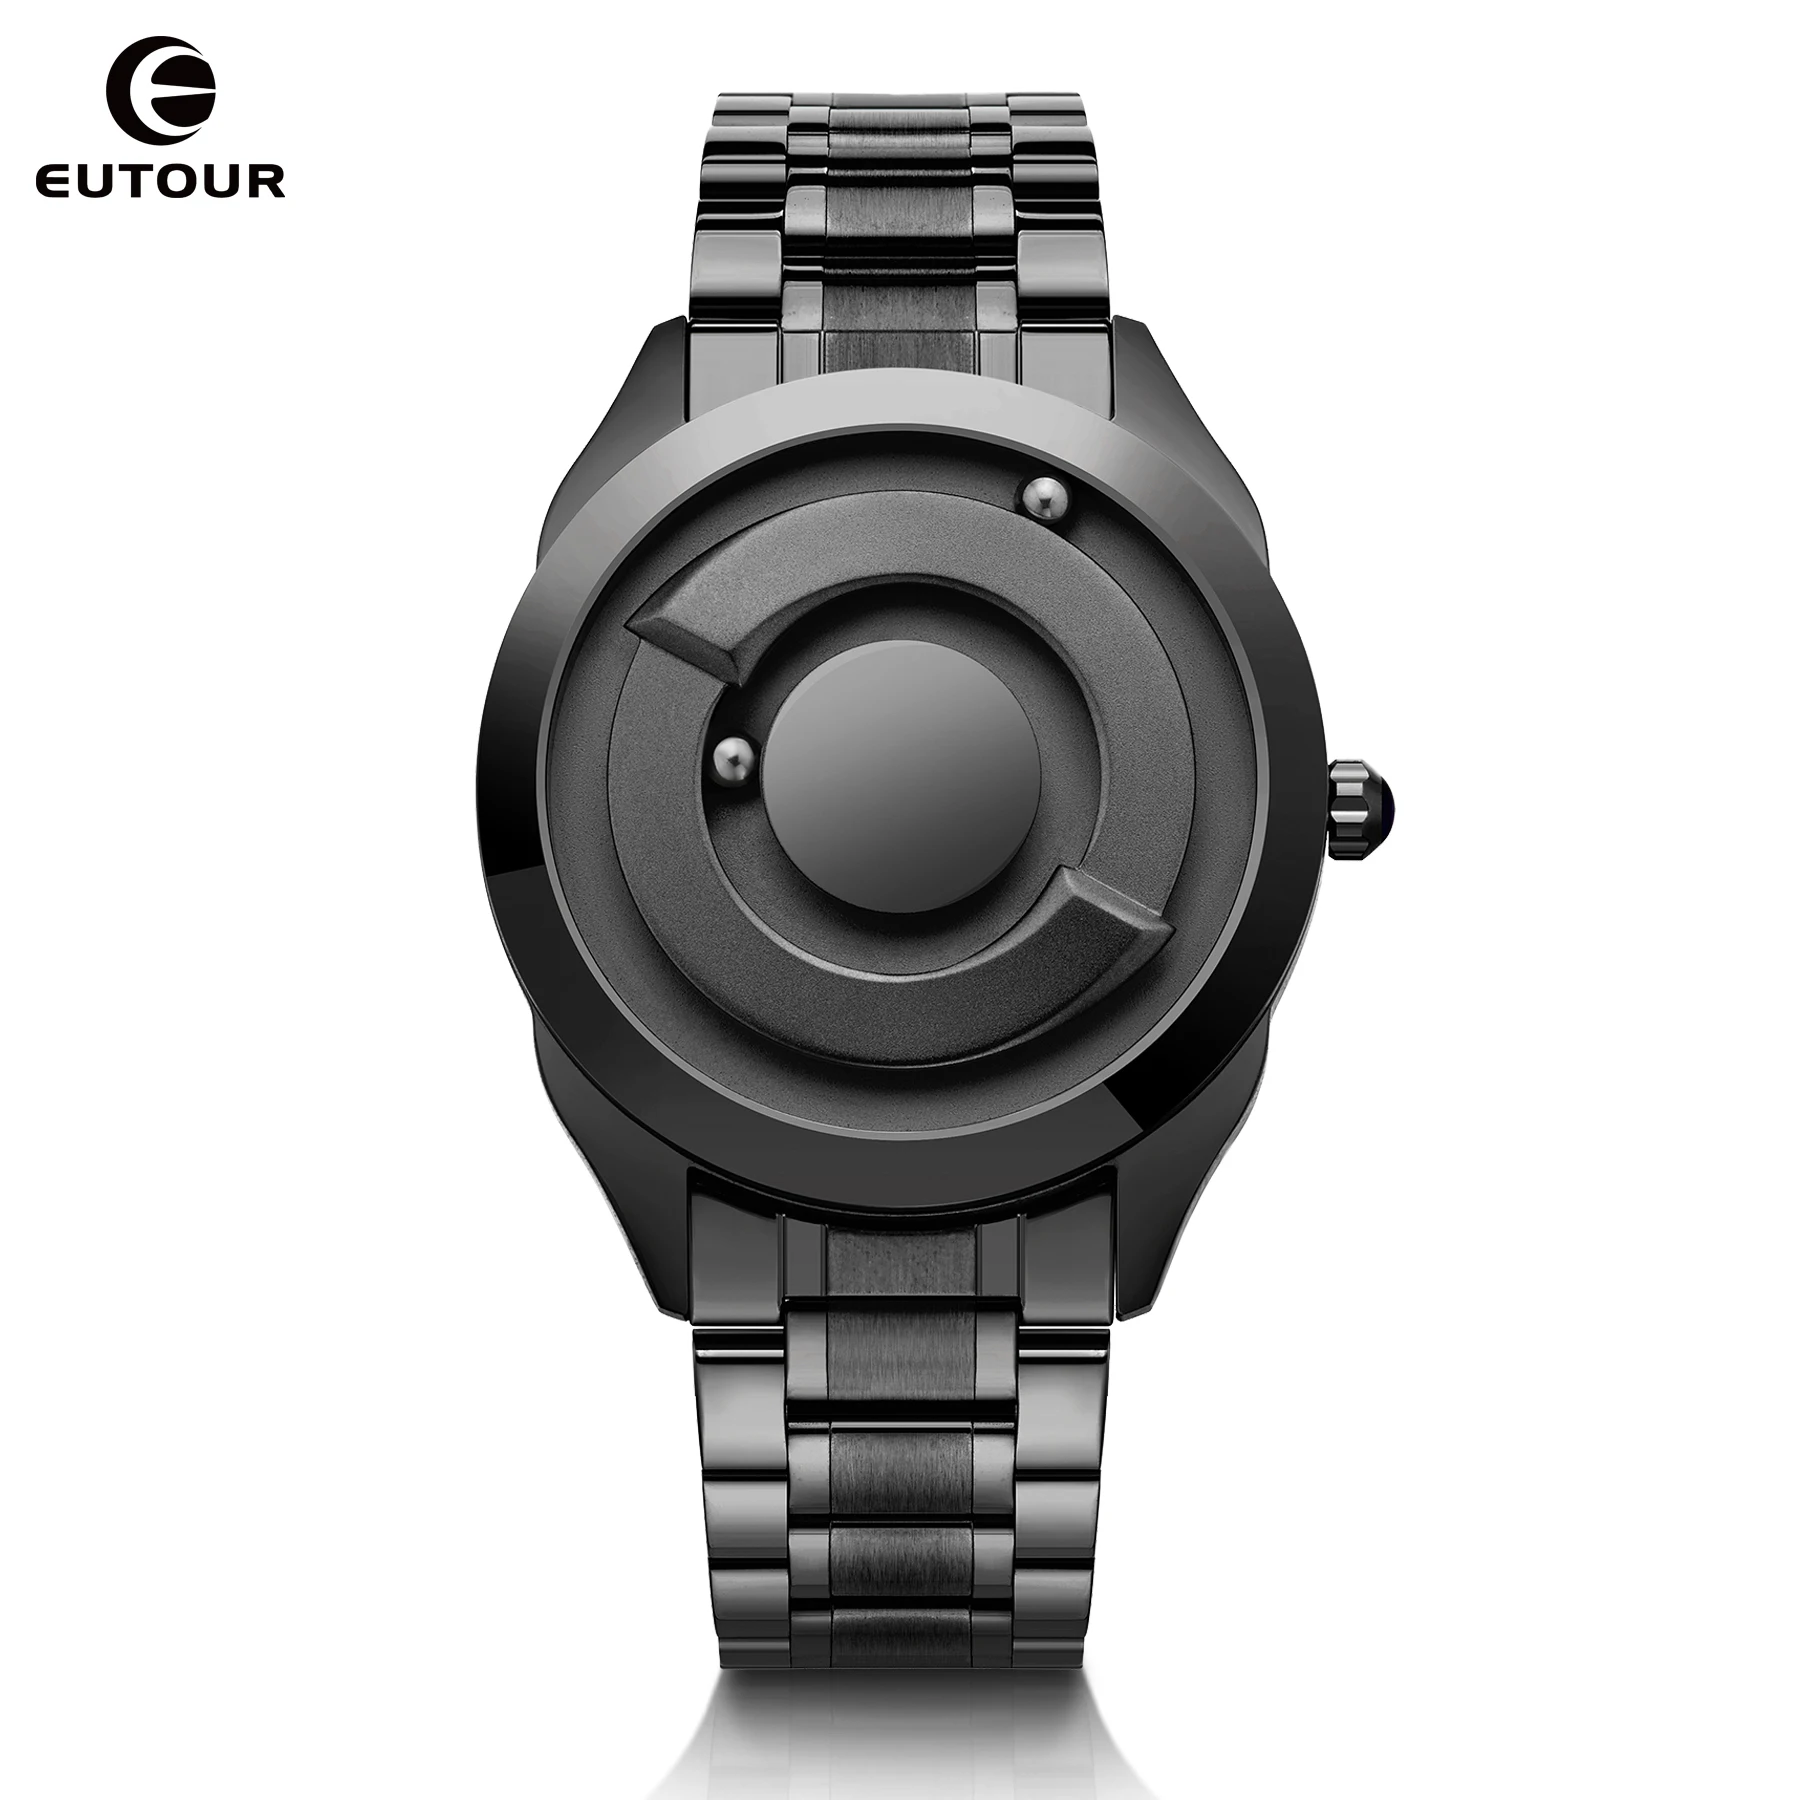 EUTOUR Magnetic Beads Men's Personality Creation Sports Watch Cool Concept Borderless Fashion Design Watch-Stainless Steel Strap concept deju gold acoustic gramophone design classic gift products speaker phone compatible 26x45 cm size gramophone